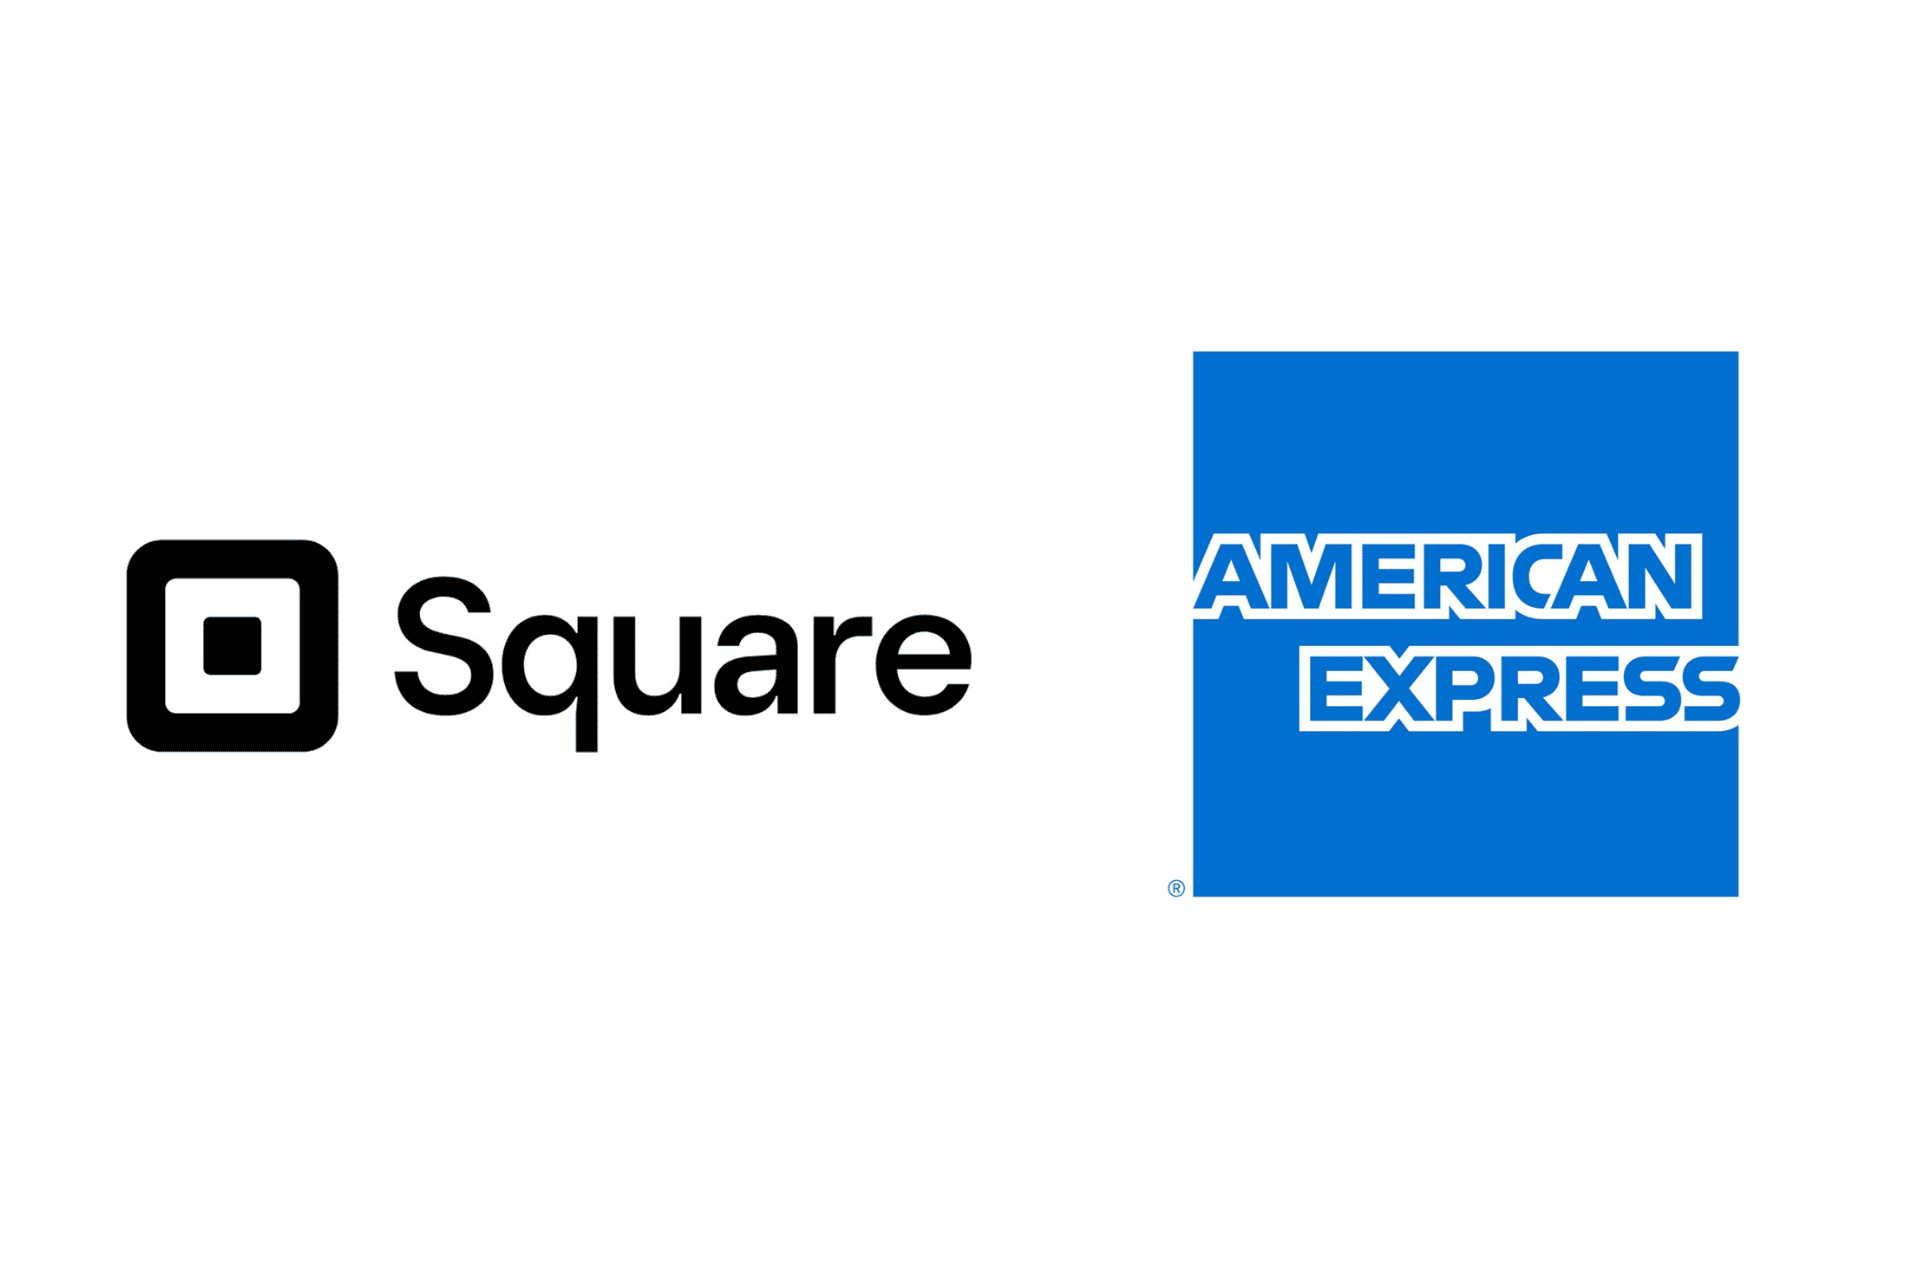 Square To Launch Amex Credit Card